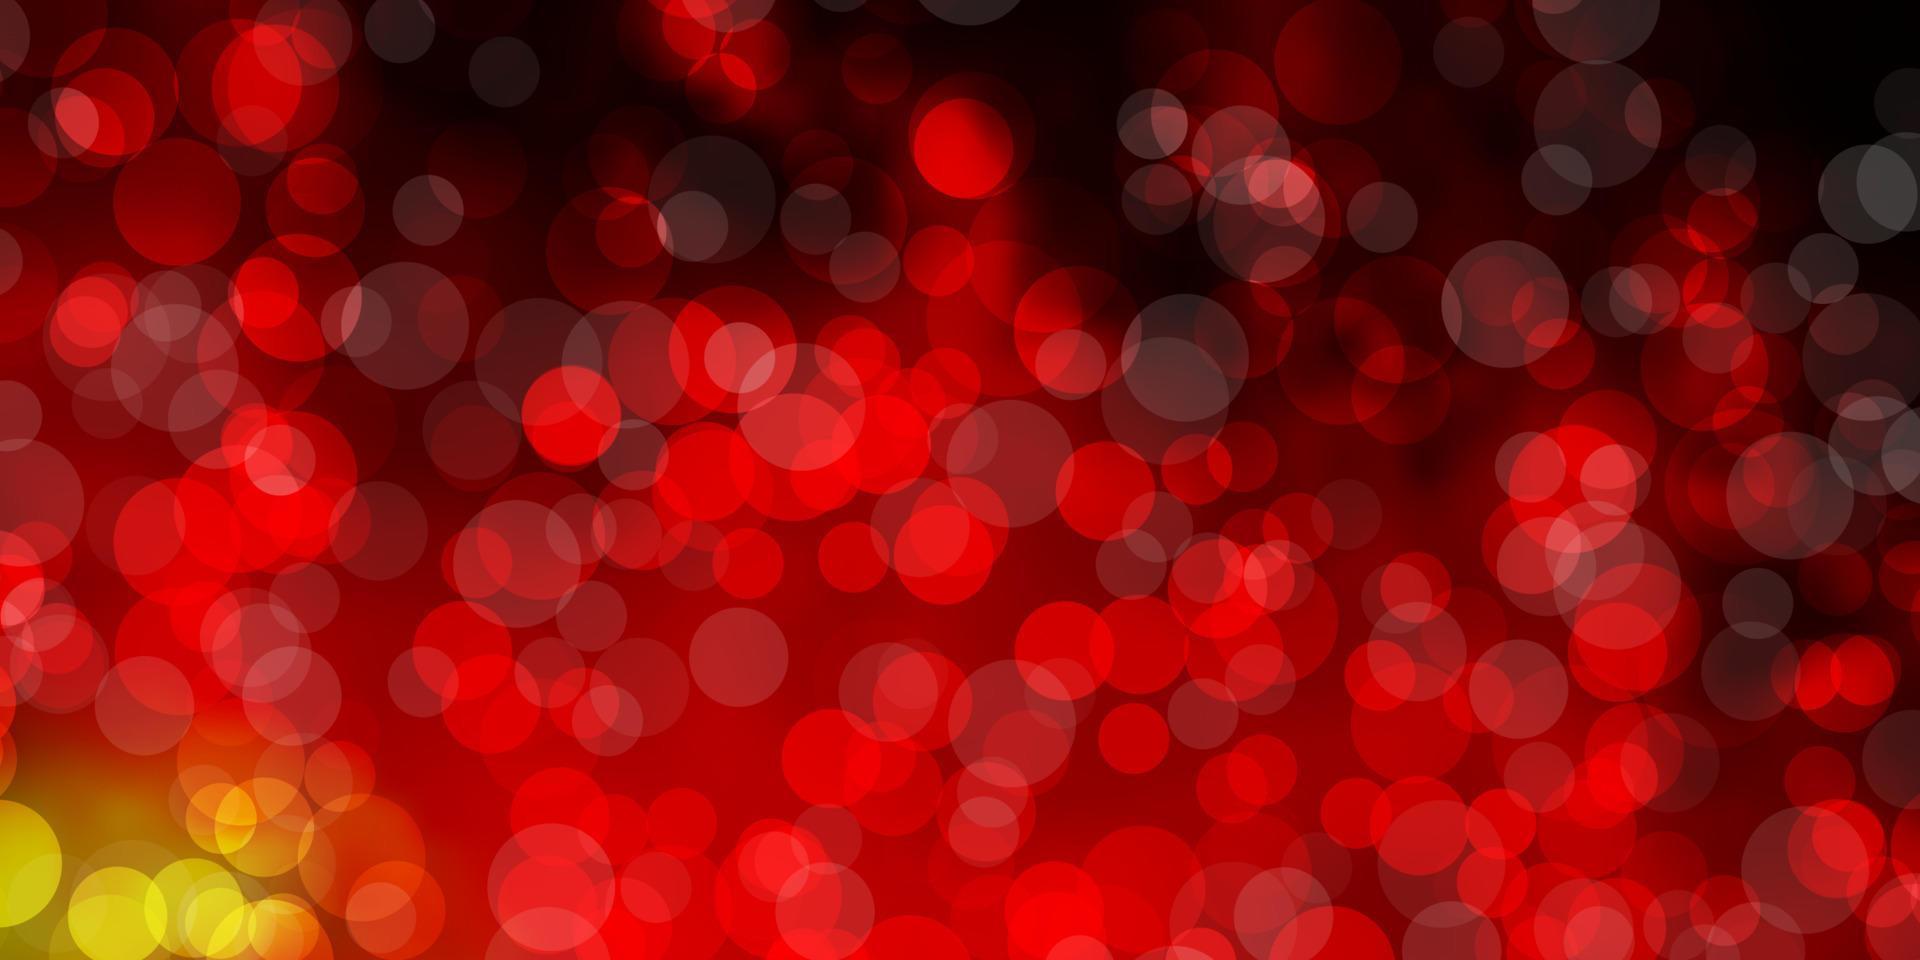 Dark Red, Yellow vector background with spots.